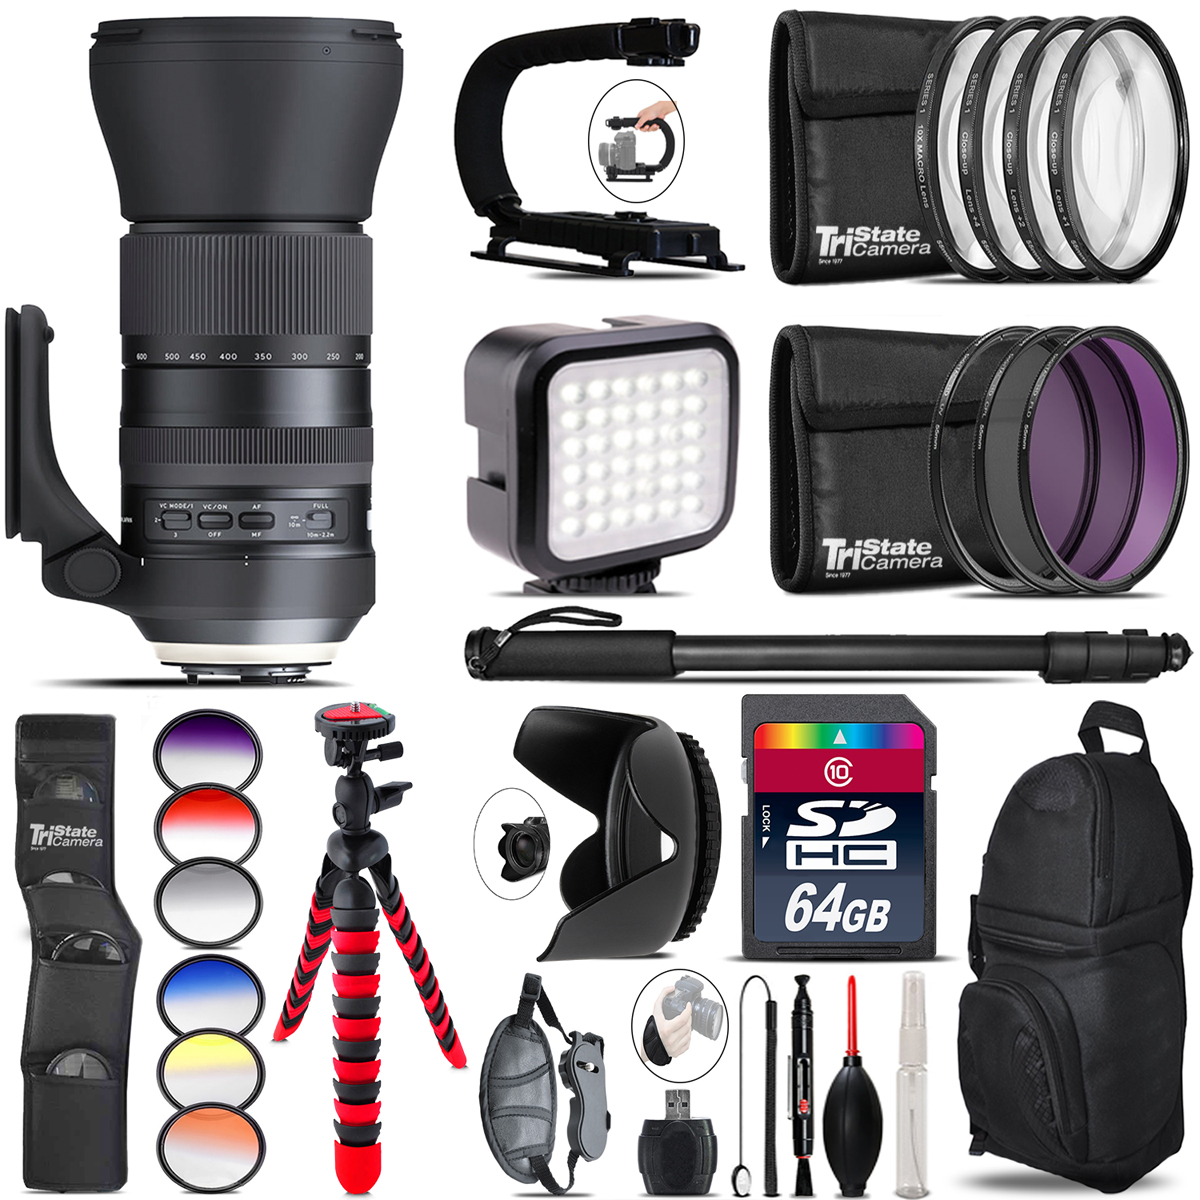 150-600mm G2 for Nikon - Video Kit + Color Filter - 64GB Accessory Kit *FREE SHIPPING*